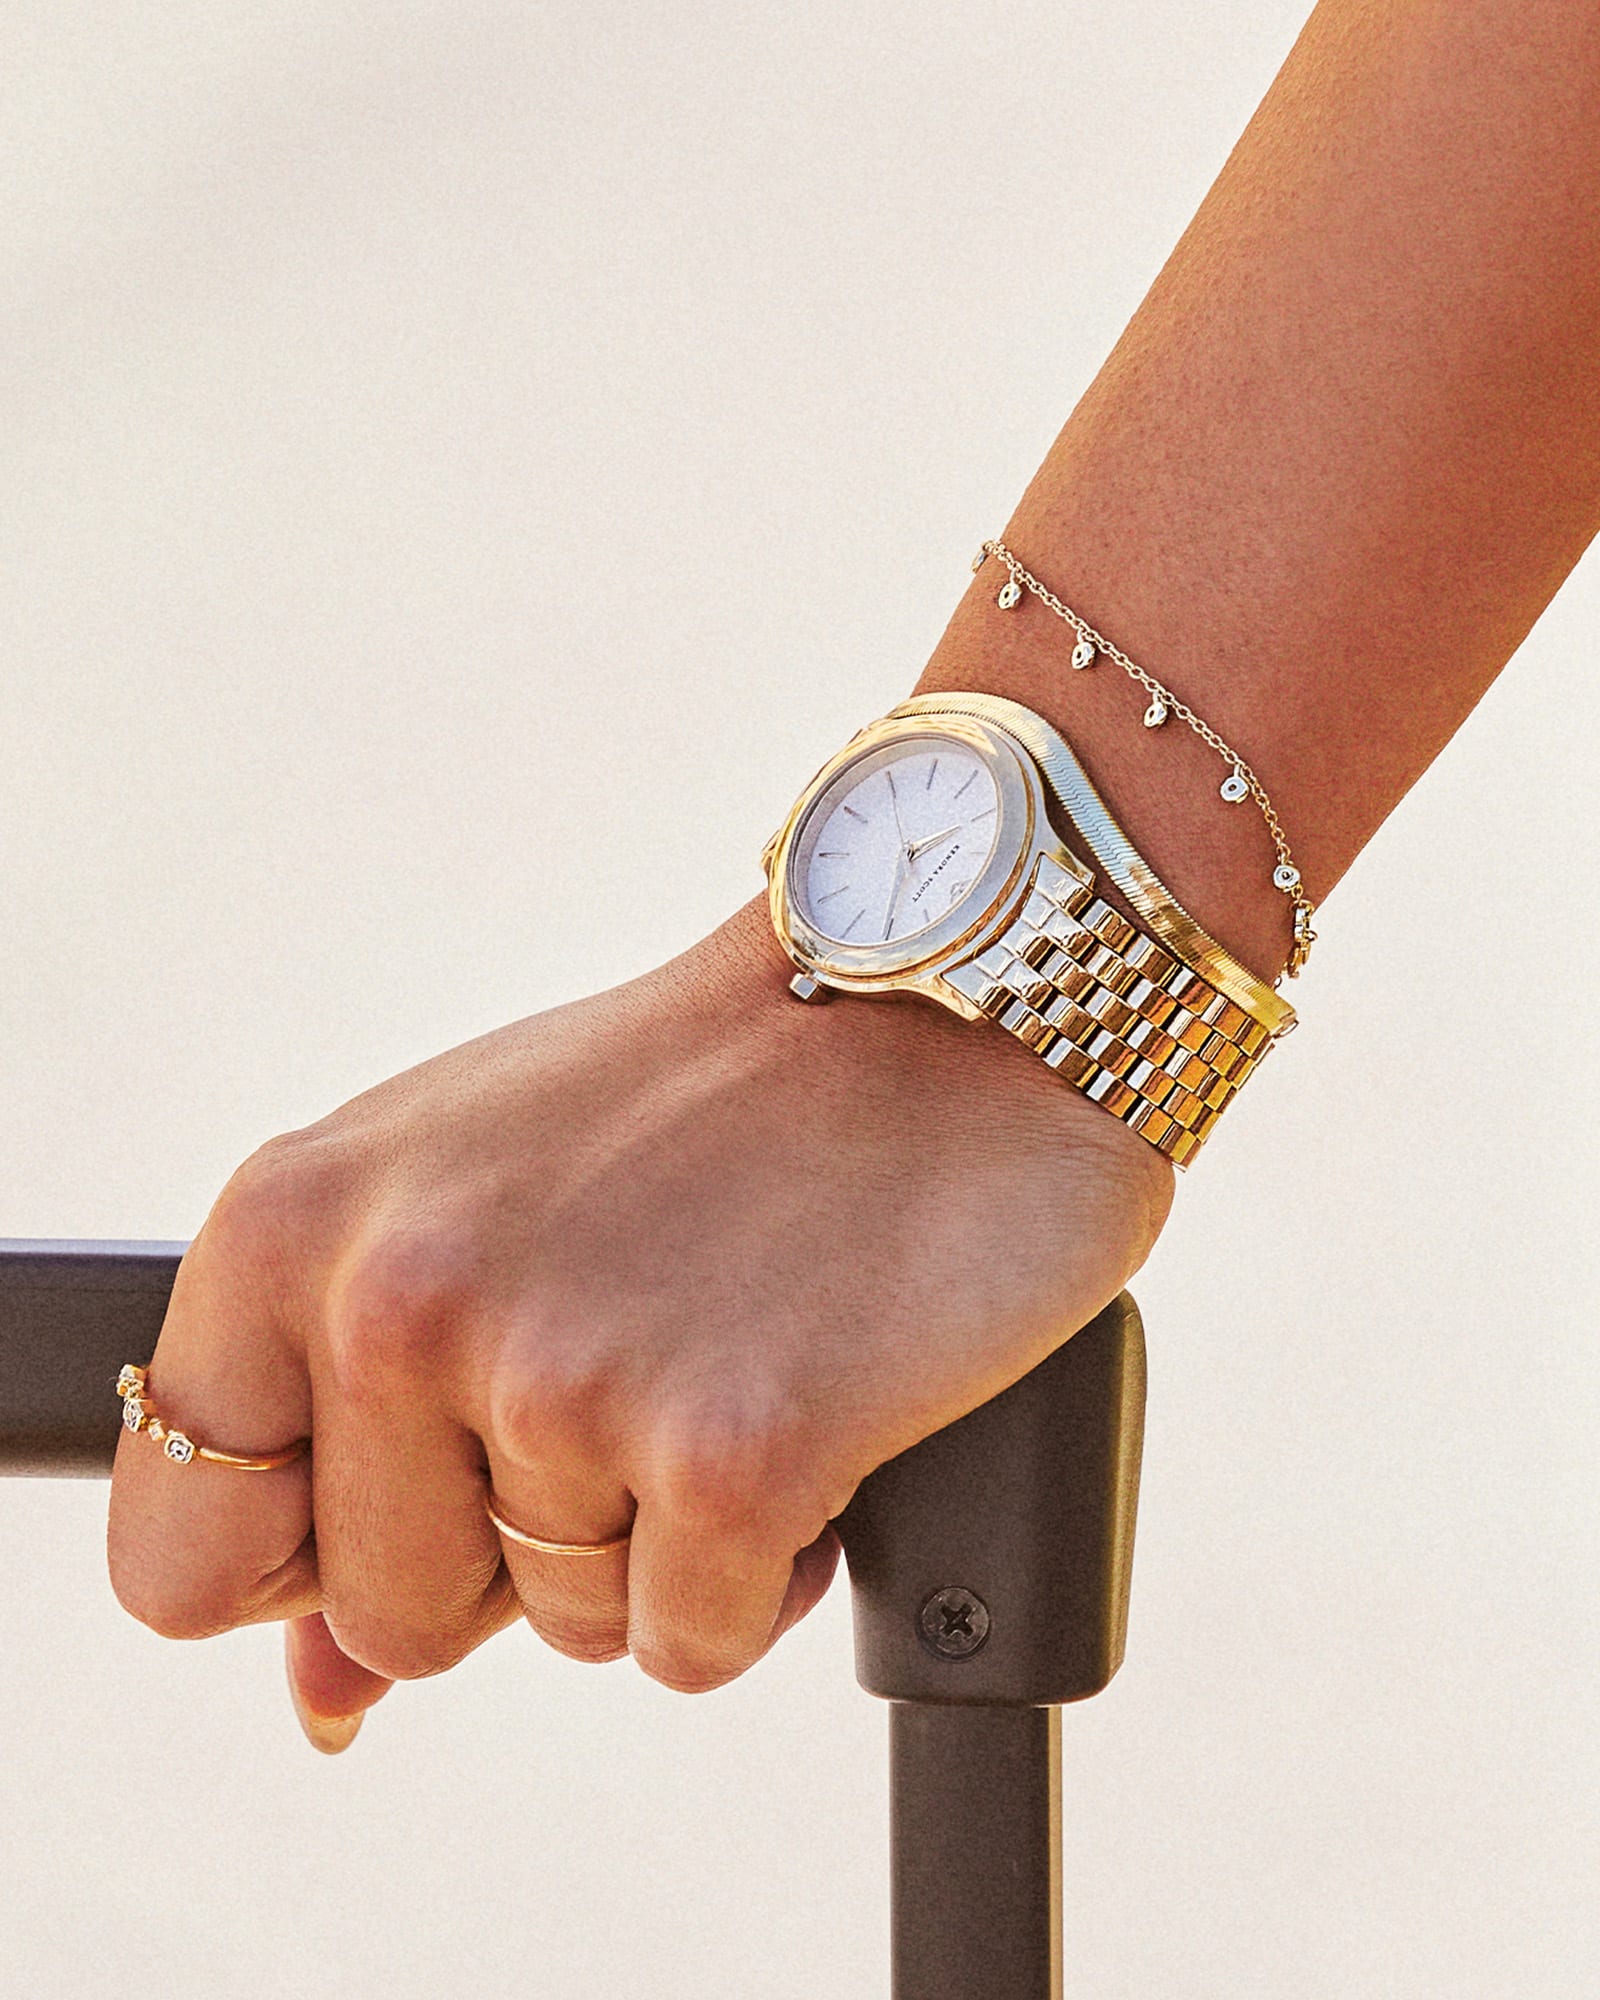 women wrist on a suitcase wearing a a gold watch and gold bracelets